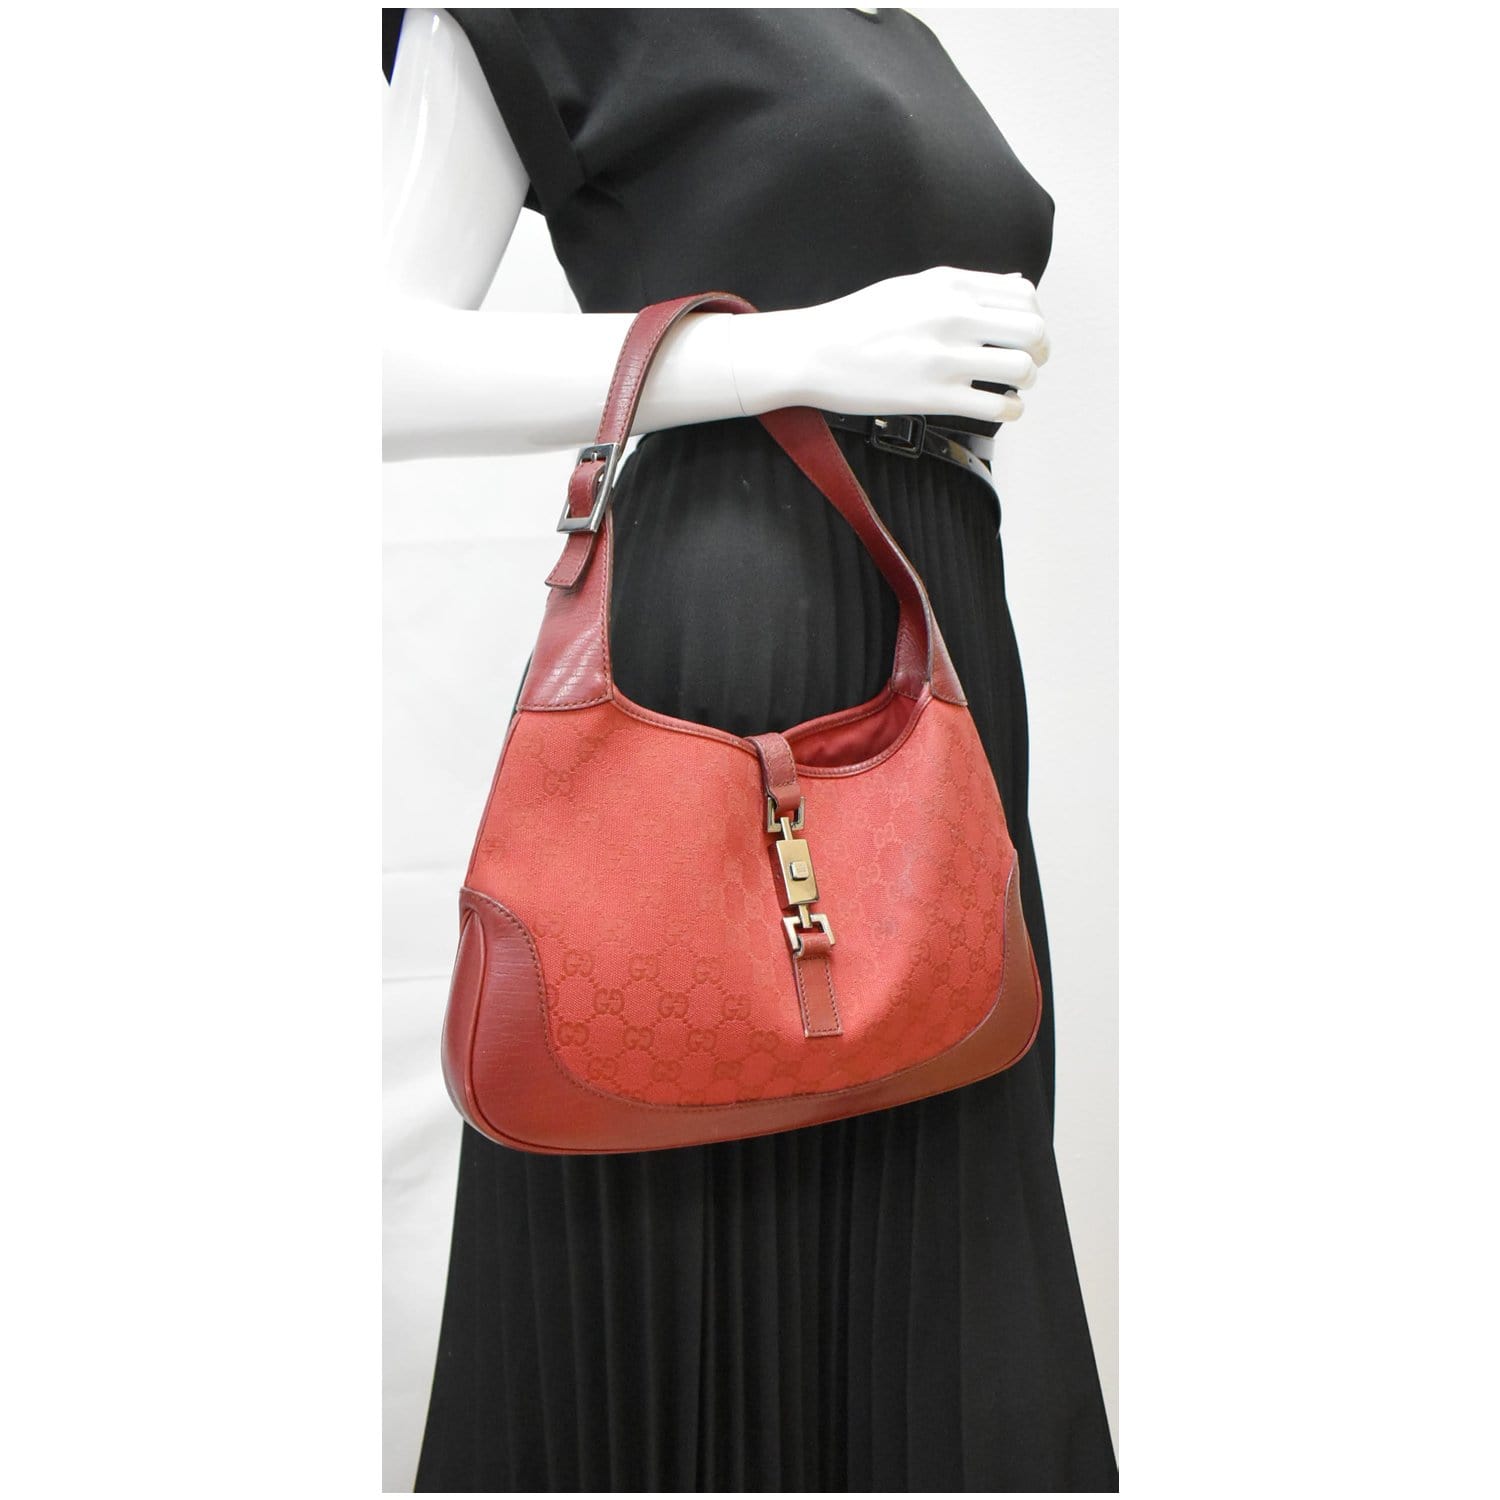 Gucci GG Canvas Red Canvas Handbag (Pre-Owned)